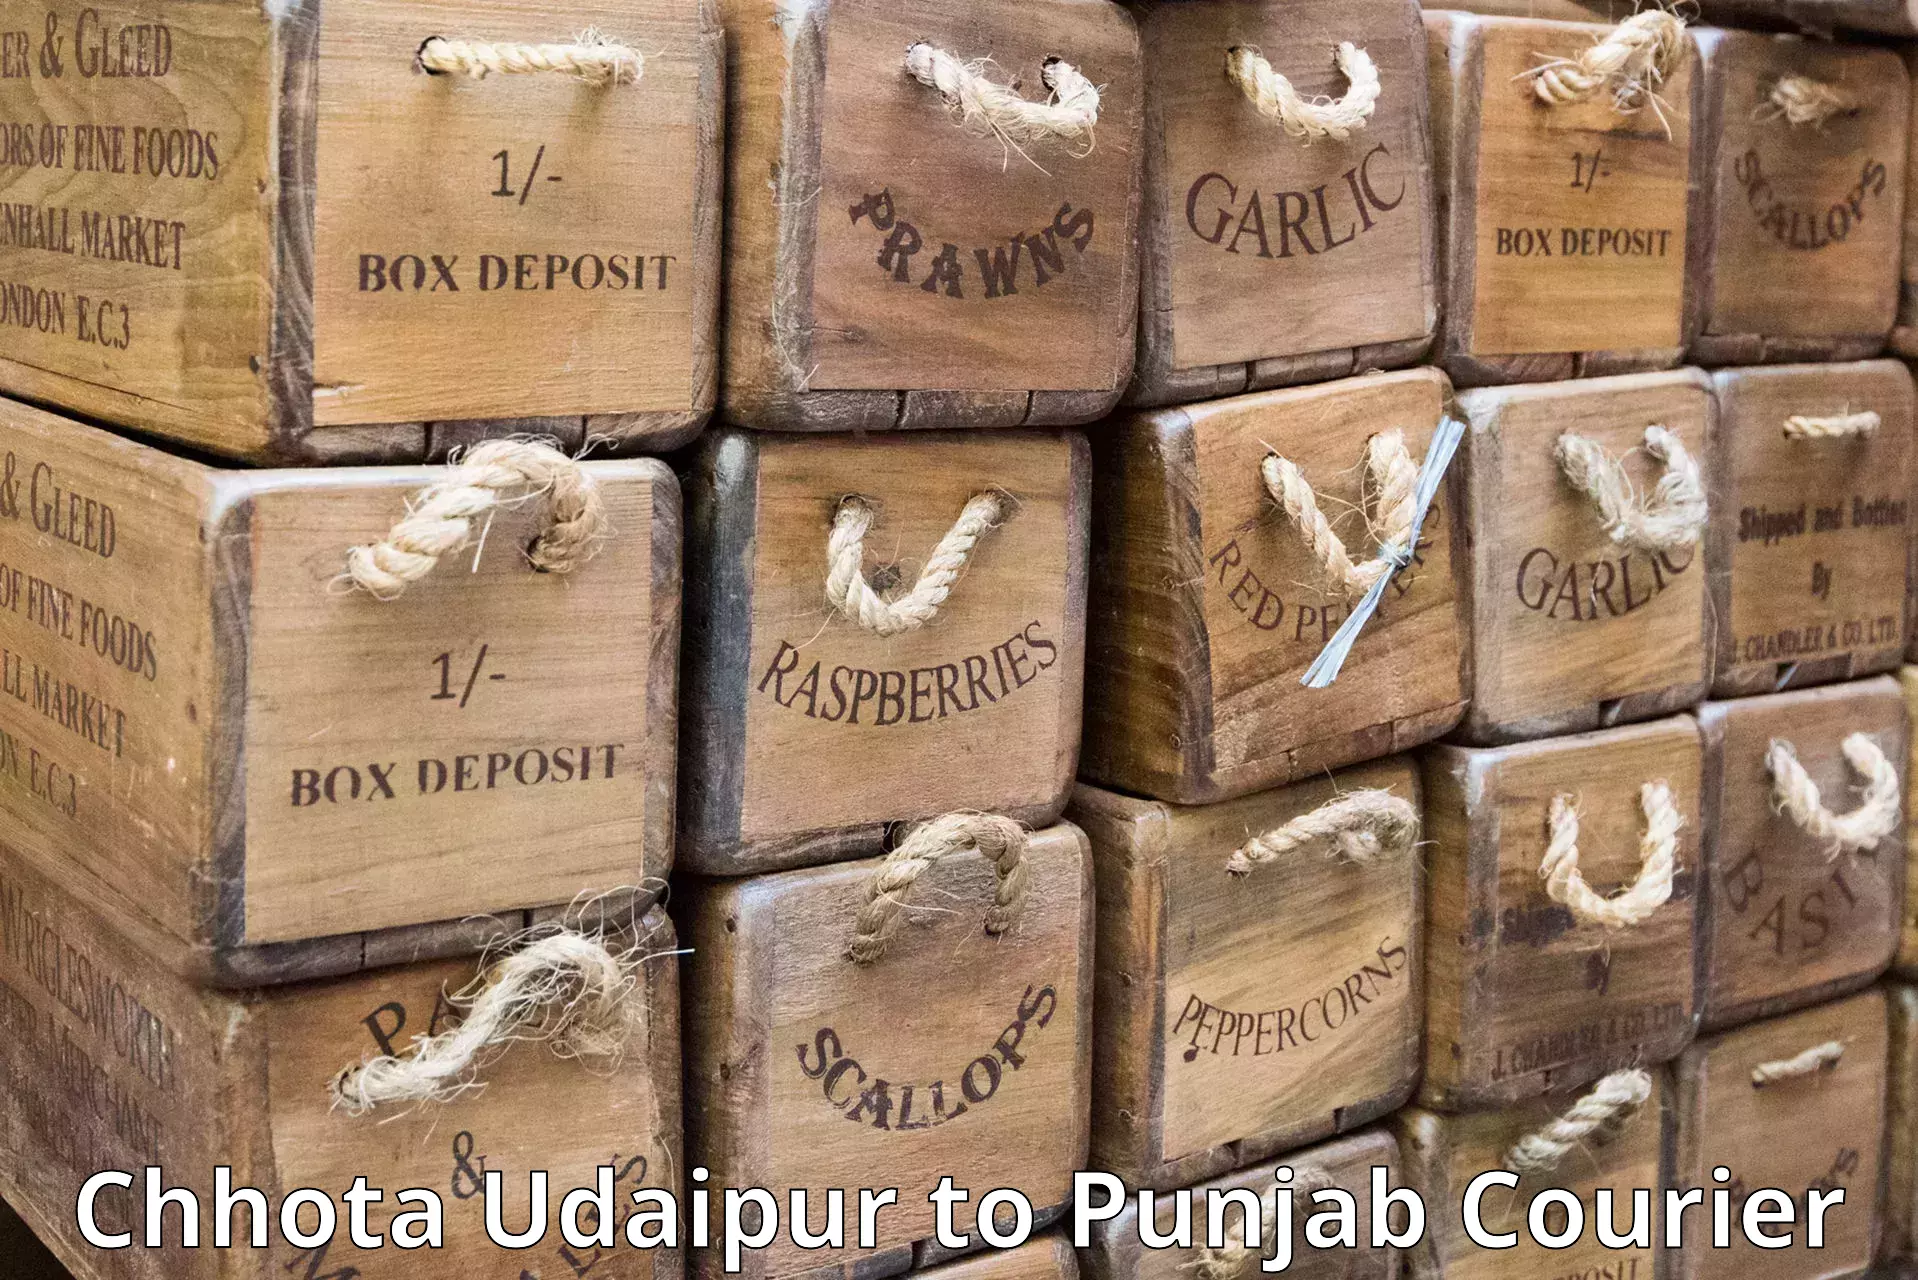 24-hour courier service Chhota Udaipur to Malerkotla